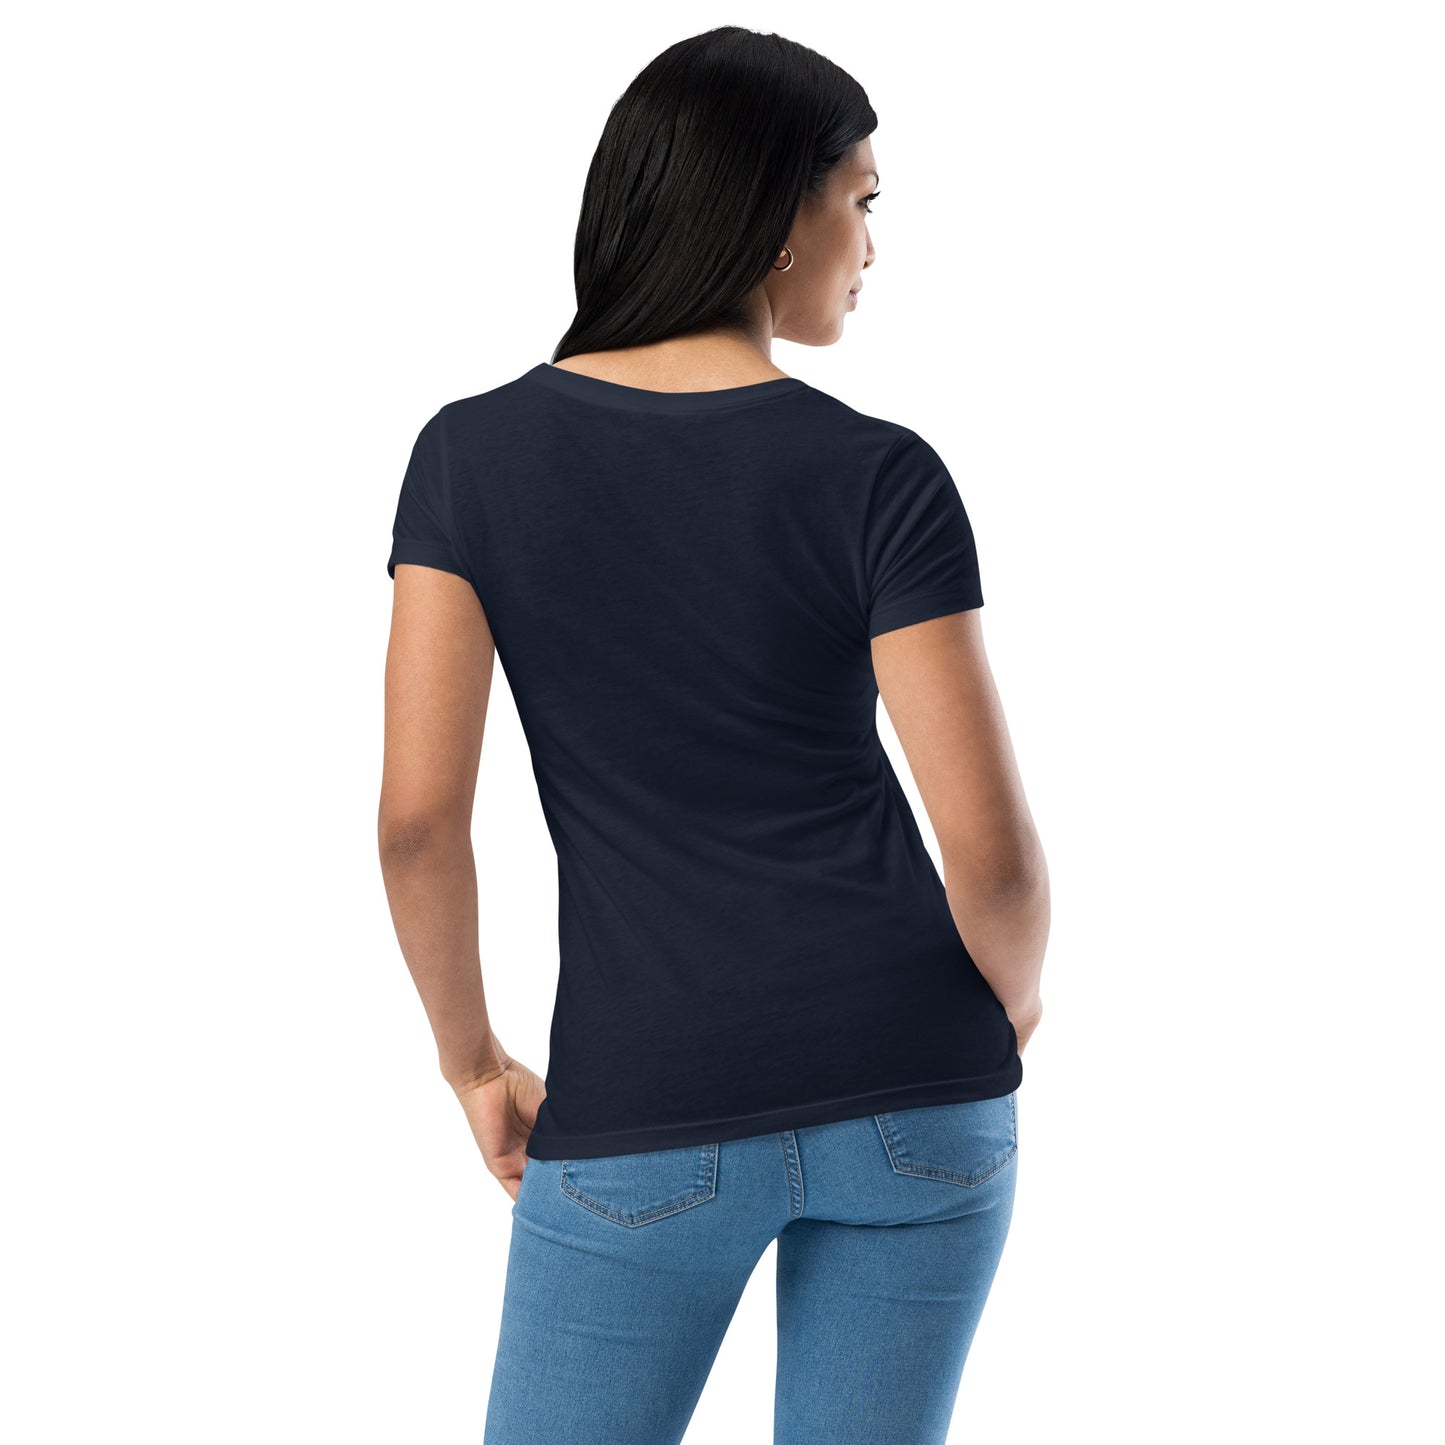 Here's Looking At You Women’s Fitted T-Shirt